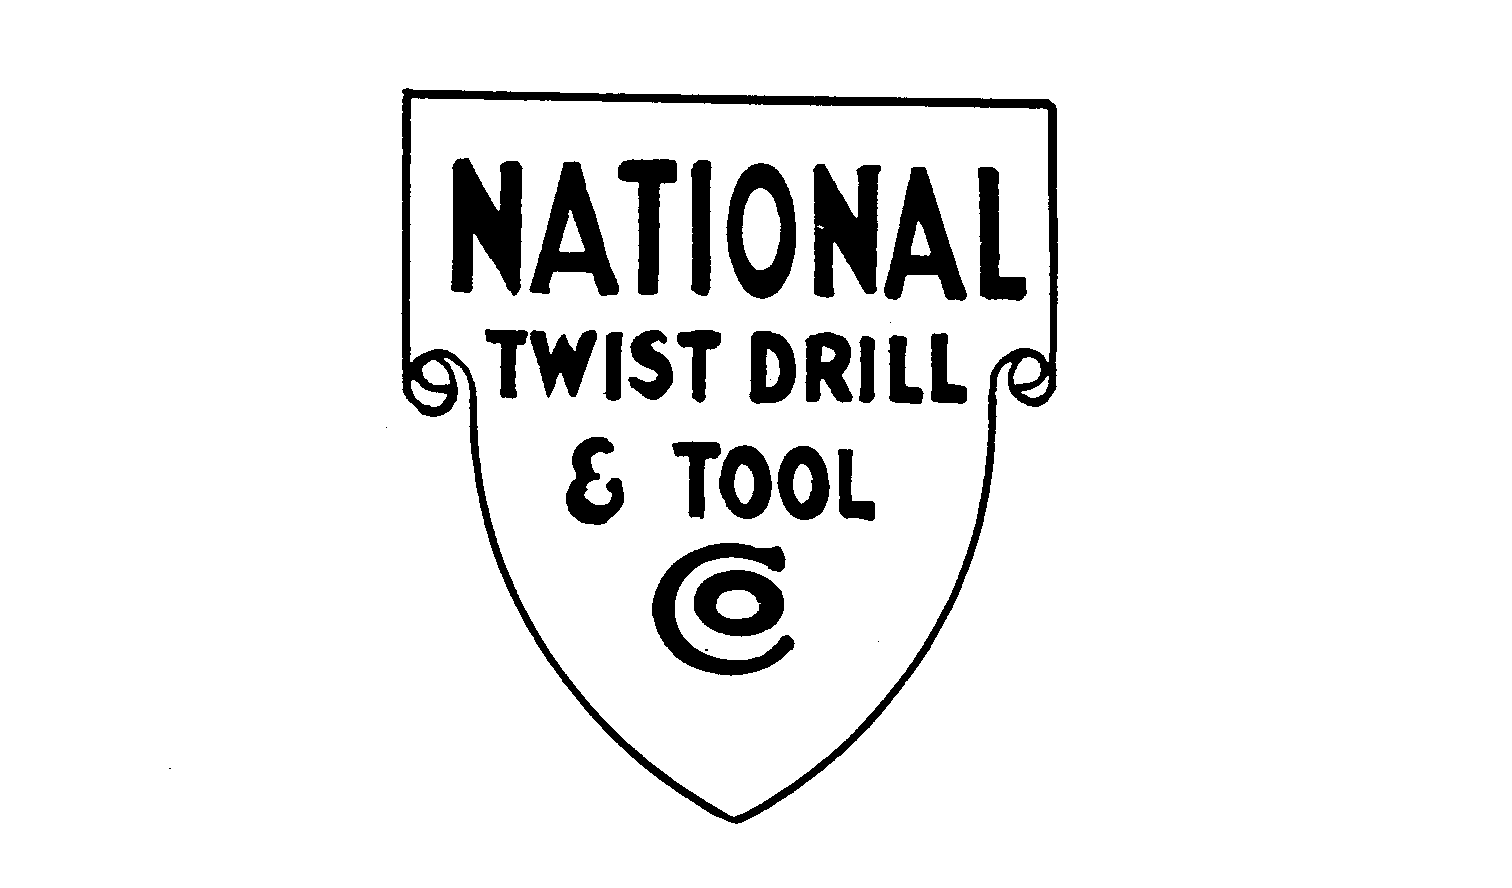  NATIONAL TWIST DRILL &amp; TOOL CO.